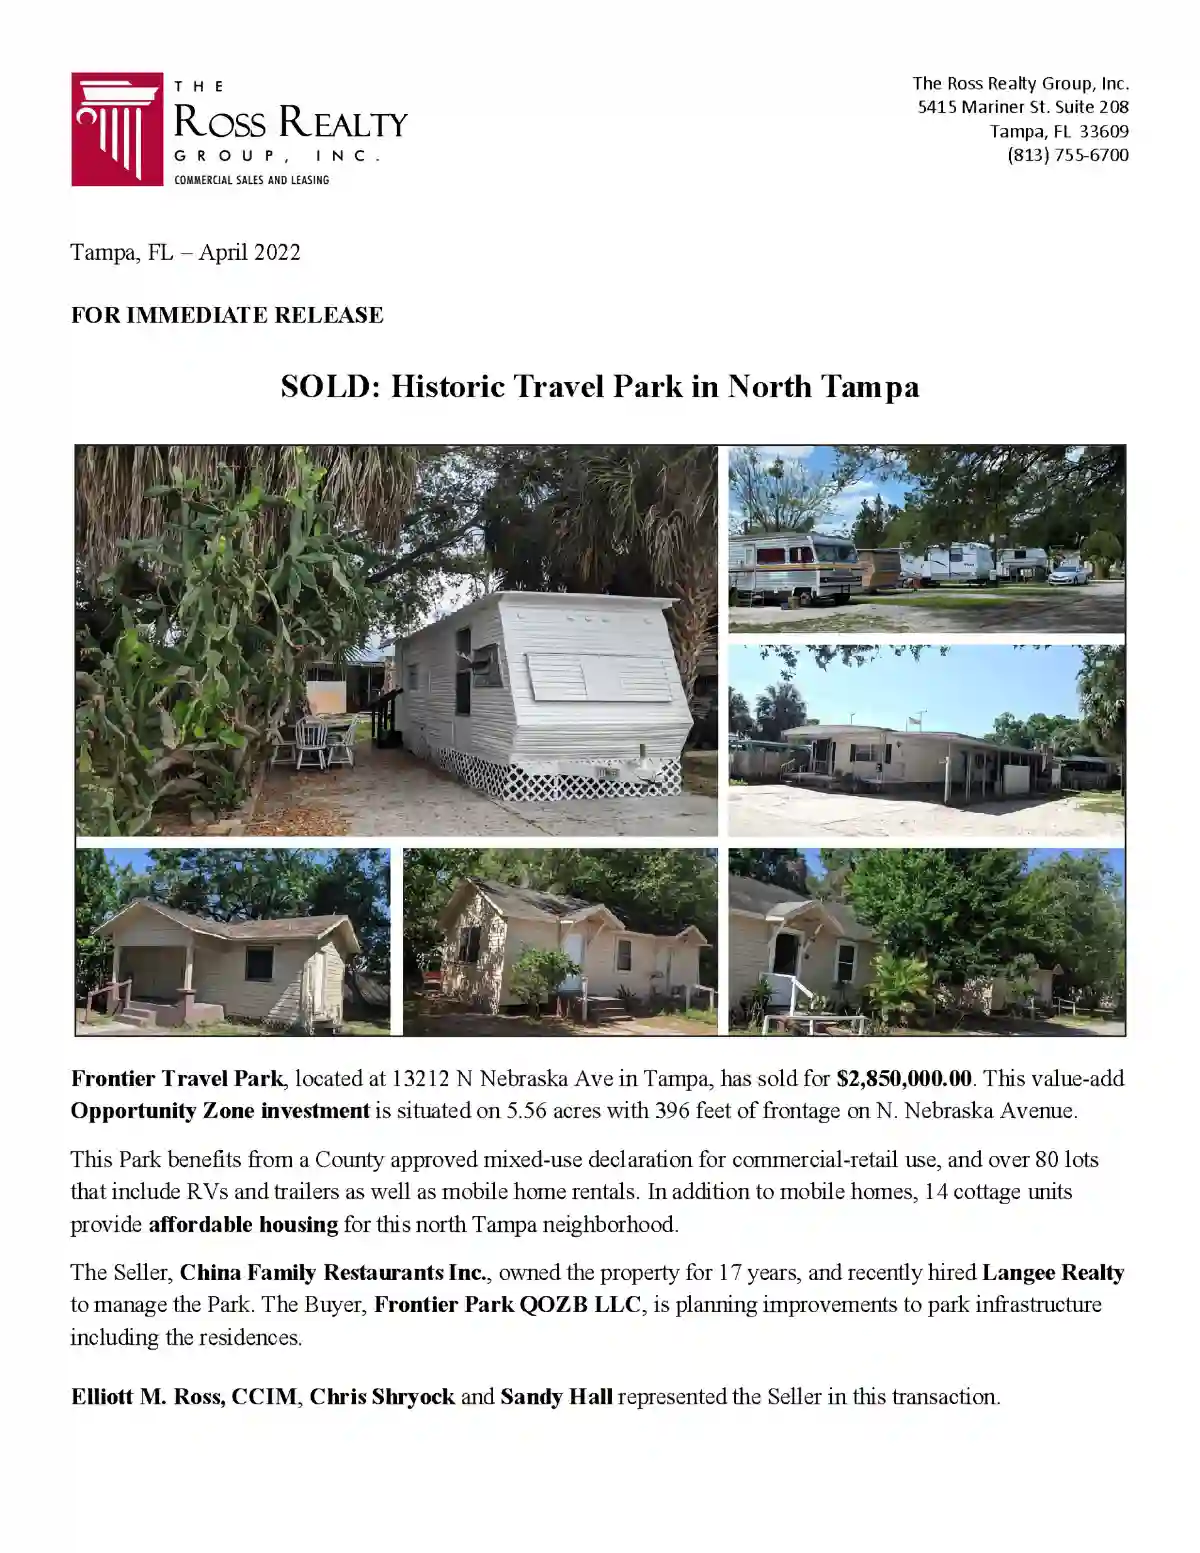 RRG Sale Frontier Travel Park in North Tampa